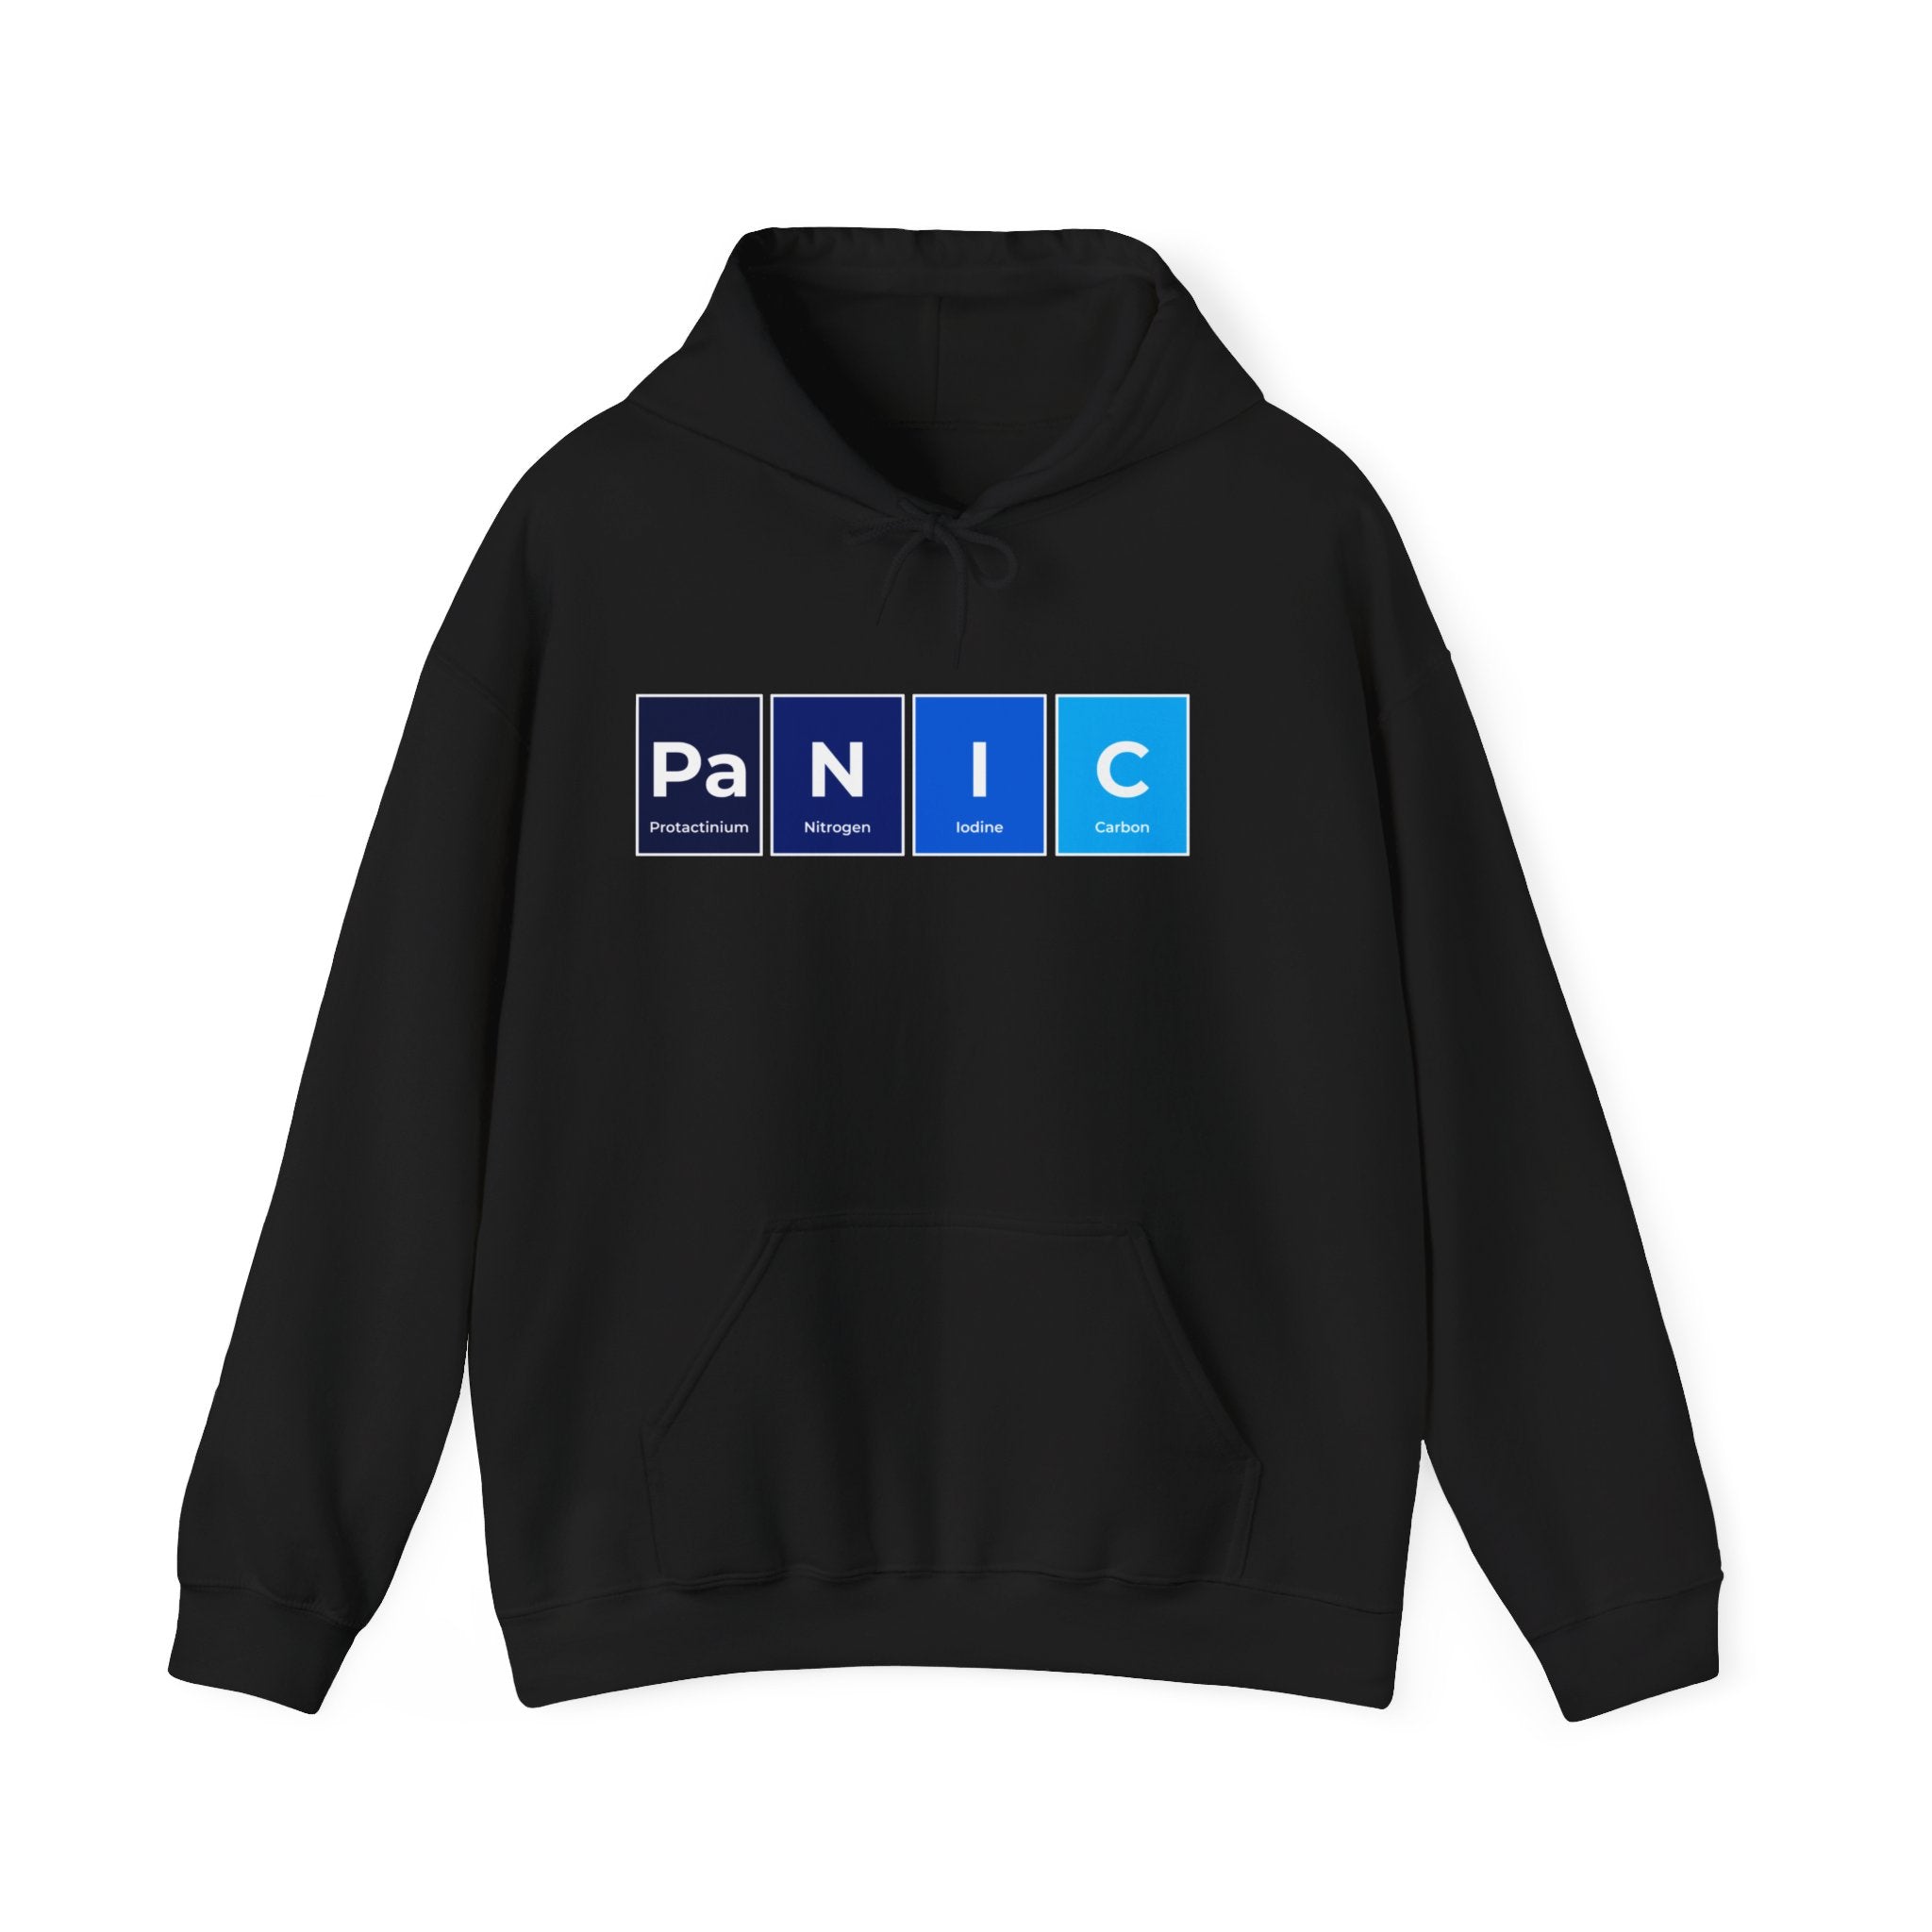 A Pa-N-I-C - Hooded Sweatshirt featuring the word "PANIC" spelled out using blocks resembling elements from the periodic table: Praseodymium (Pr), Nitrogen (N), Iodine (I), and Carbon (C). This wardrobe essential combines unique, fashionable designs with a touch of scientific flair.